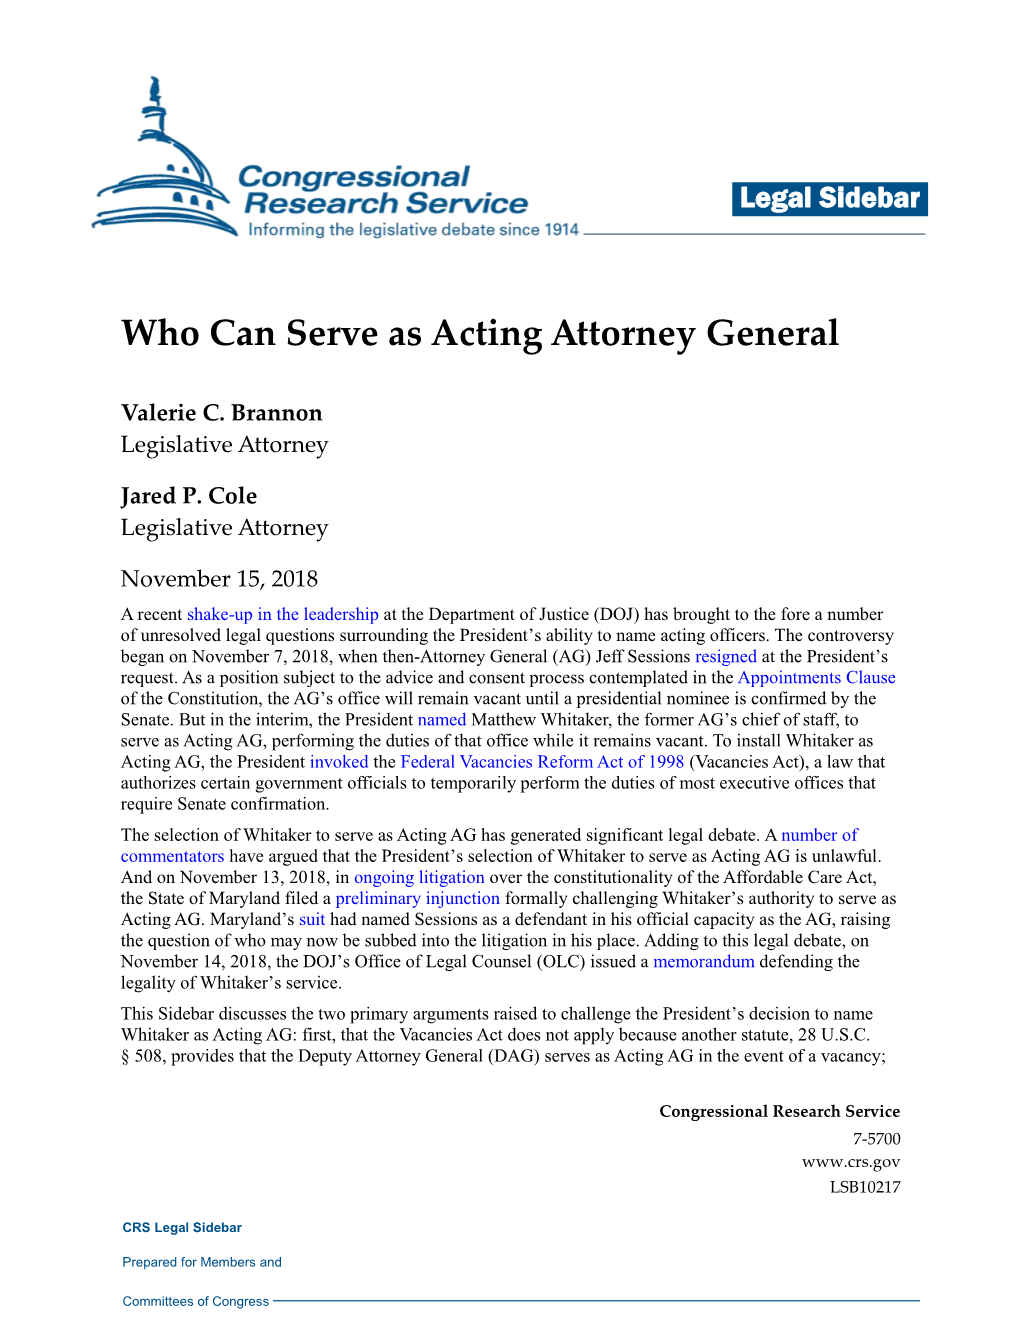 Who Can Serve As Acting Attorney General